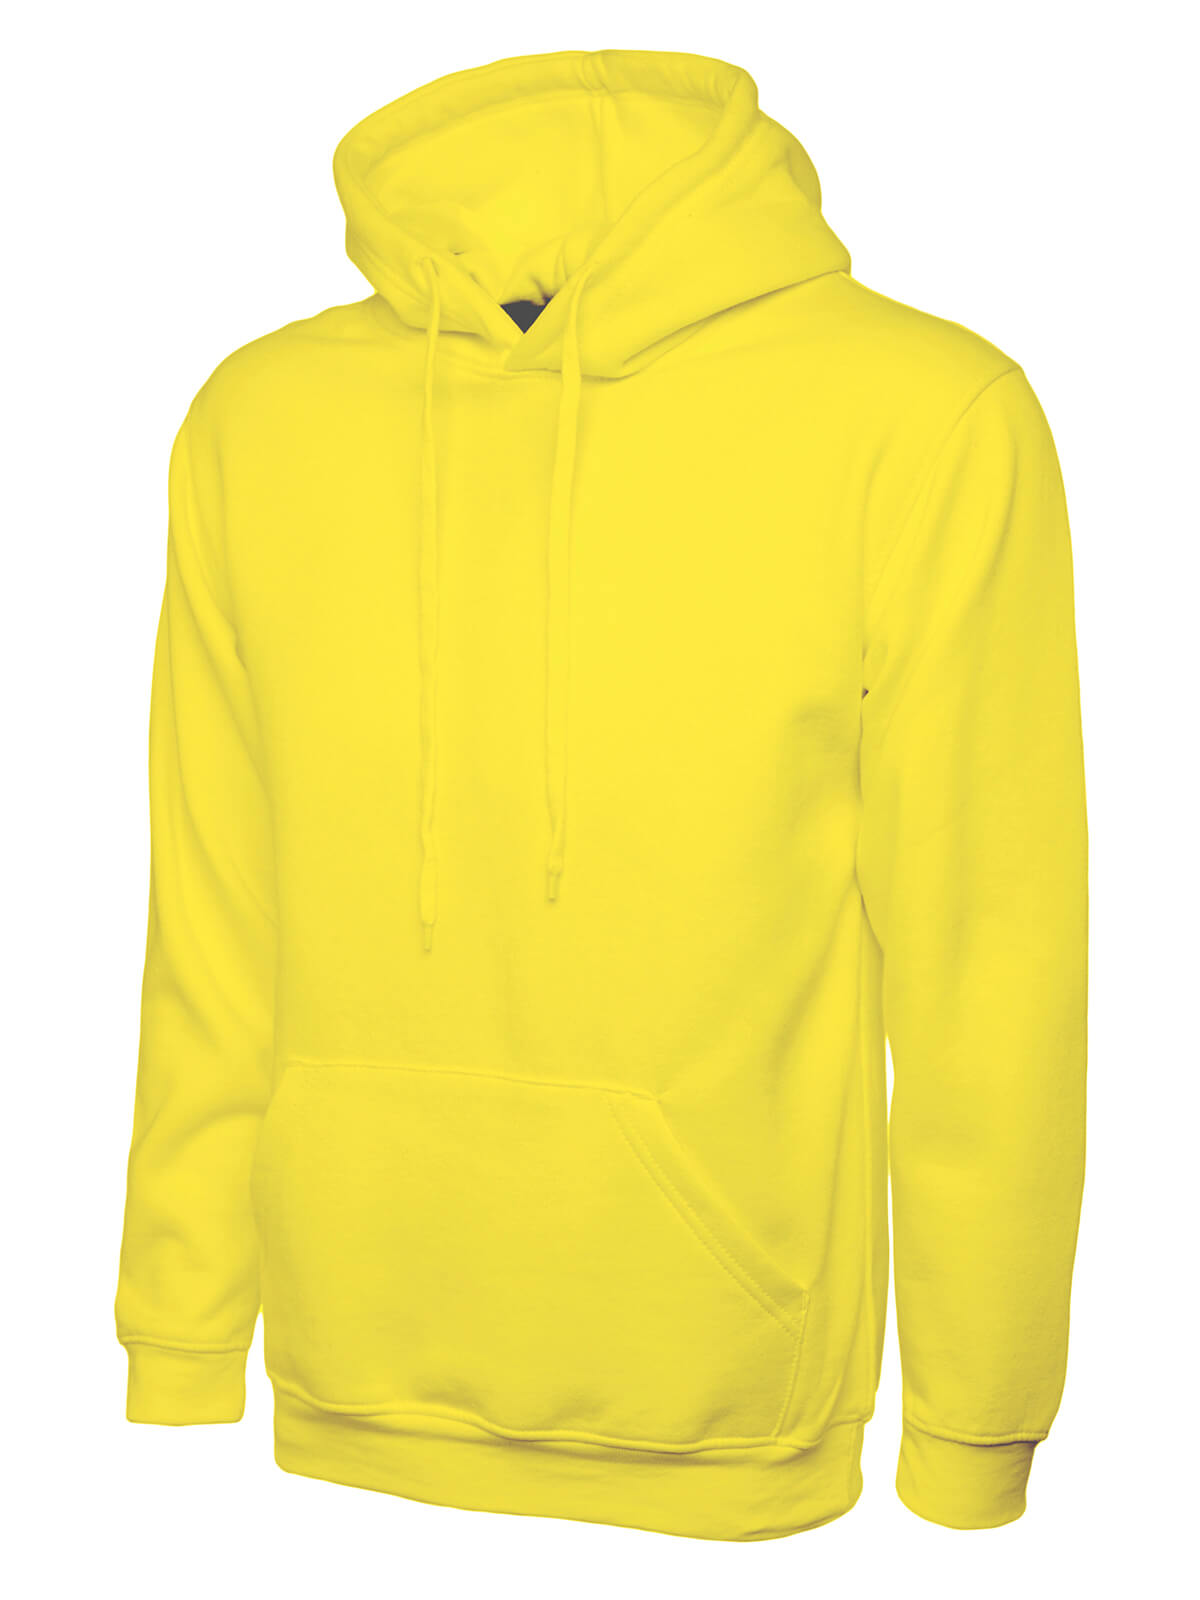 Plain Yellow Hooded Sweatshirt Jumper Pullover Double Fabric Soft Ribbed